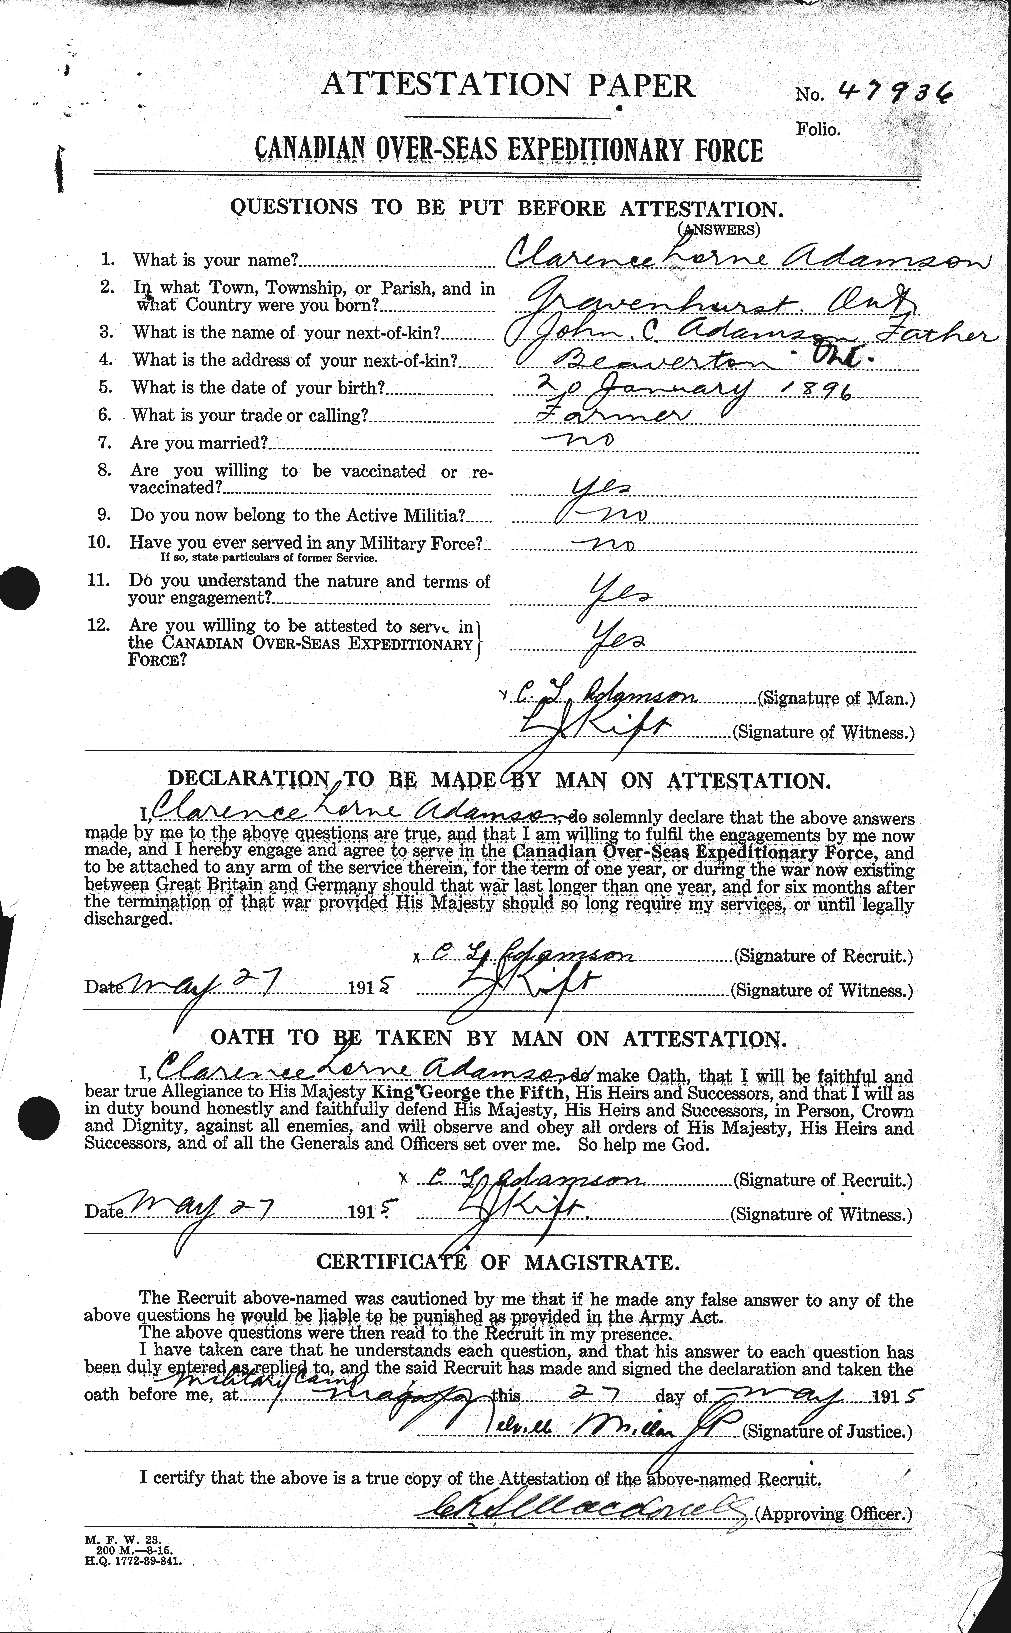 Personnel Records of the First World War - CEF 202323a